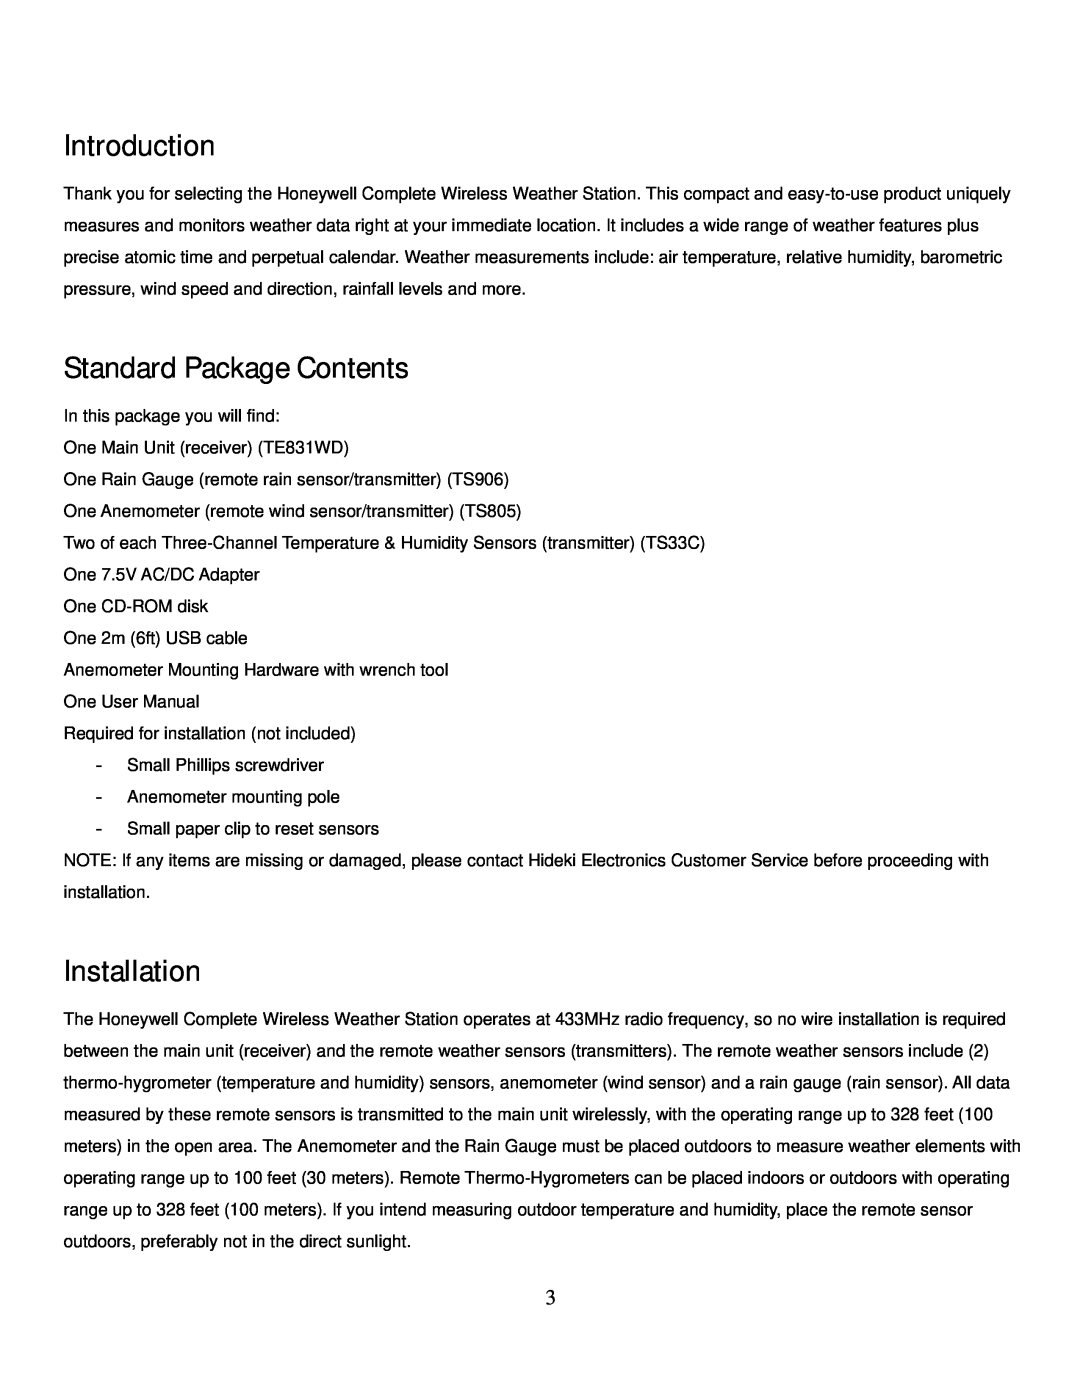 Honeywell TE831W-2 user manual Introduction, Standard Package Contents, Installation 